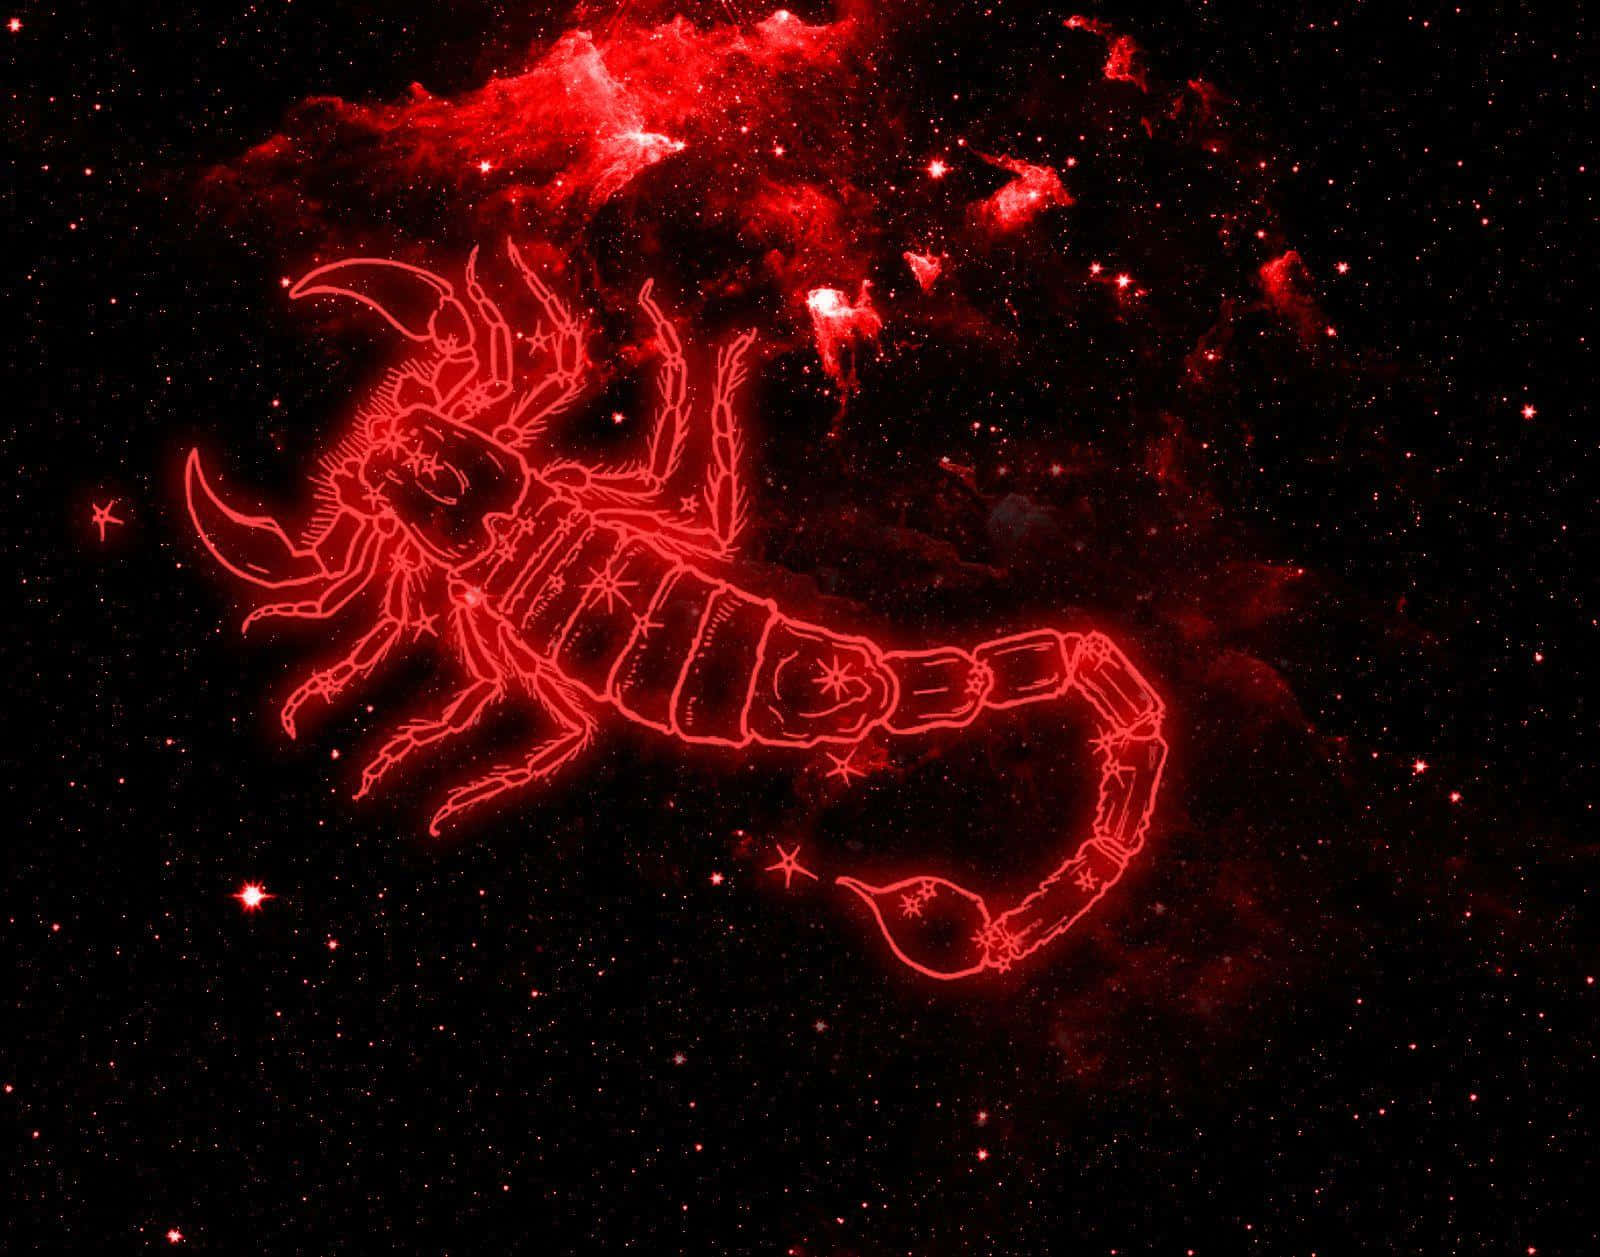 A Scorpion Is Drawn In Red On A Starry Background